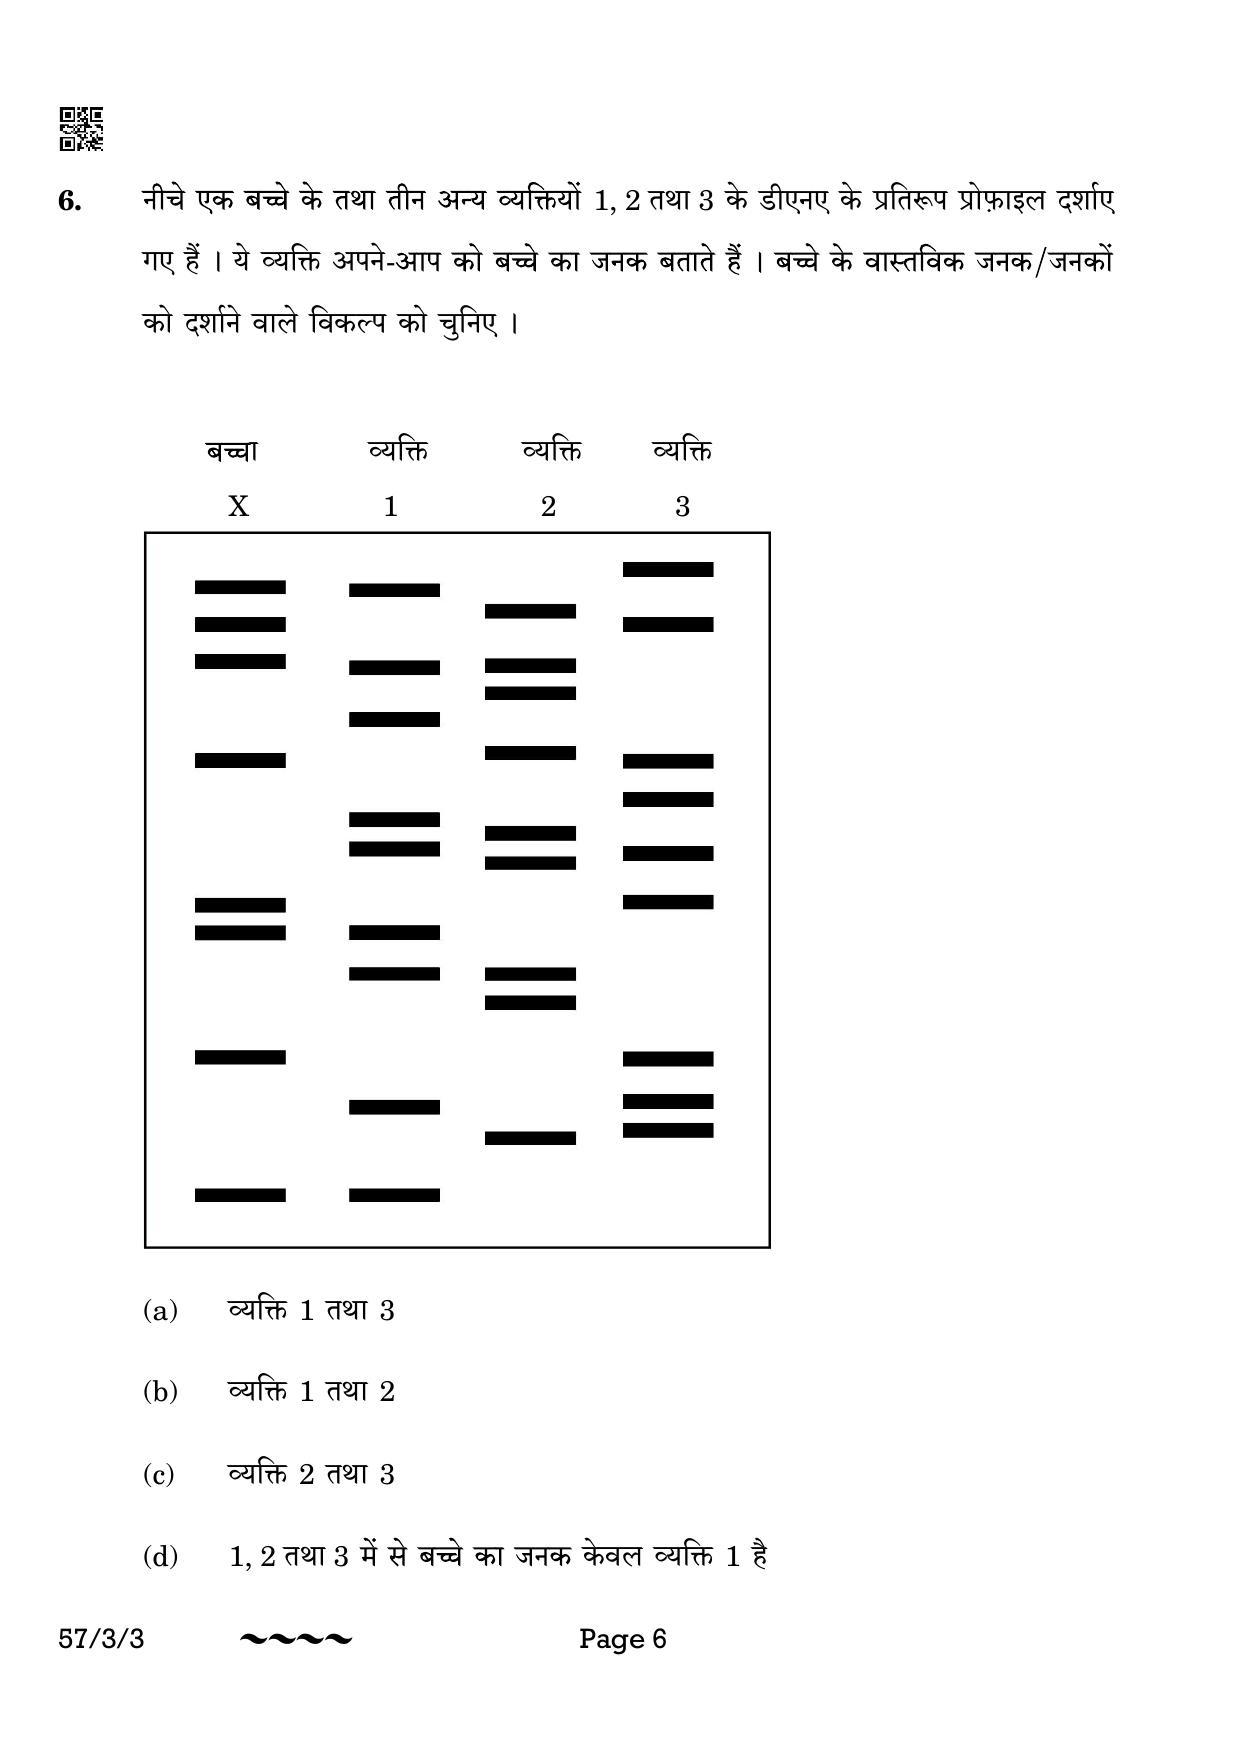 CBSE Class 12 57-3-3 Biology 2023 Question Paper - Page 6